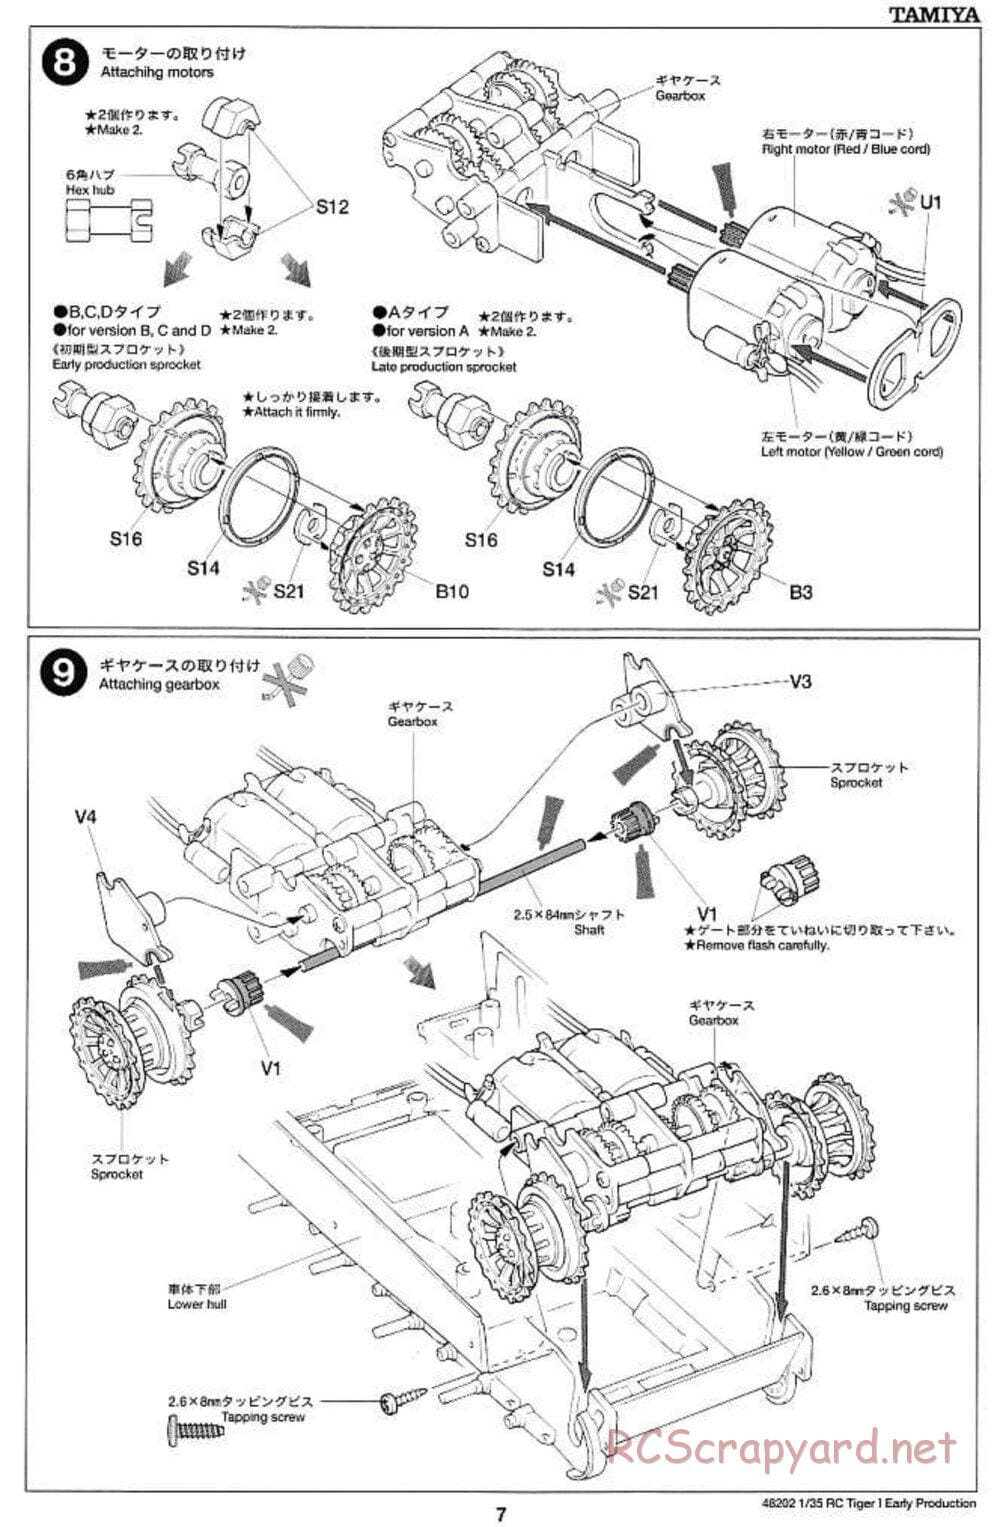 Tamiya - German Tiger 1 Early Production - 1/35 Scale Chassis - Manual - Page 7